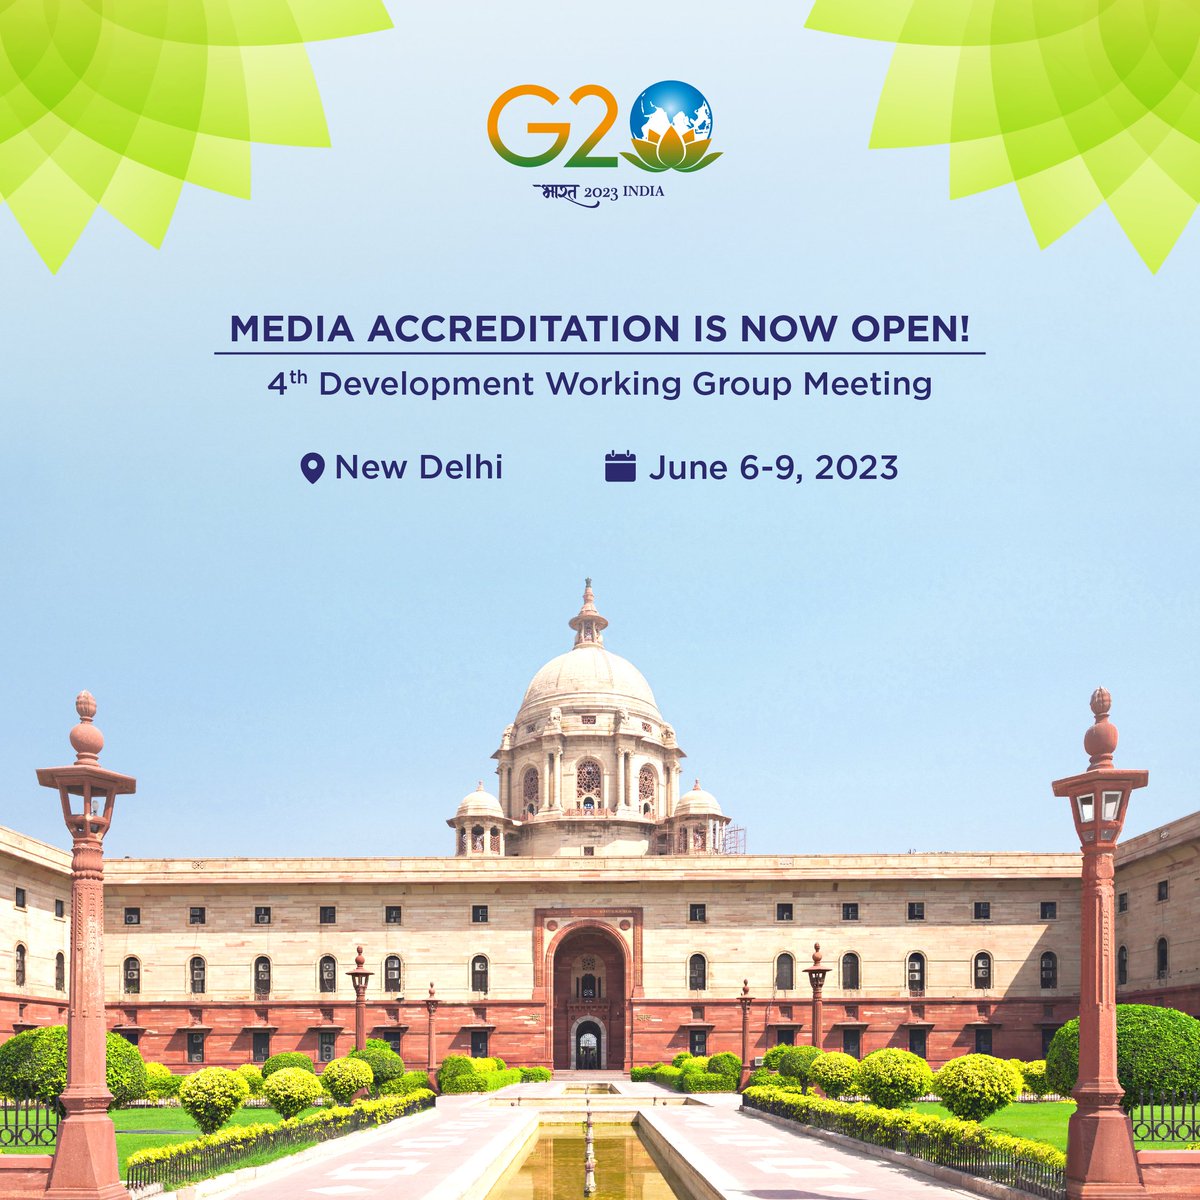 📣 #G20India Update!

Media accreditation is now open for the 4th Development Working Group Meeting. #G20DWG

📍 New Delhi
🗓️ June 6-9, 2023

Apply 👉 g20.org/en/login/